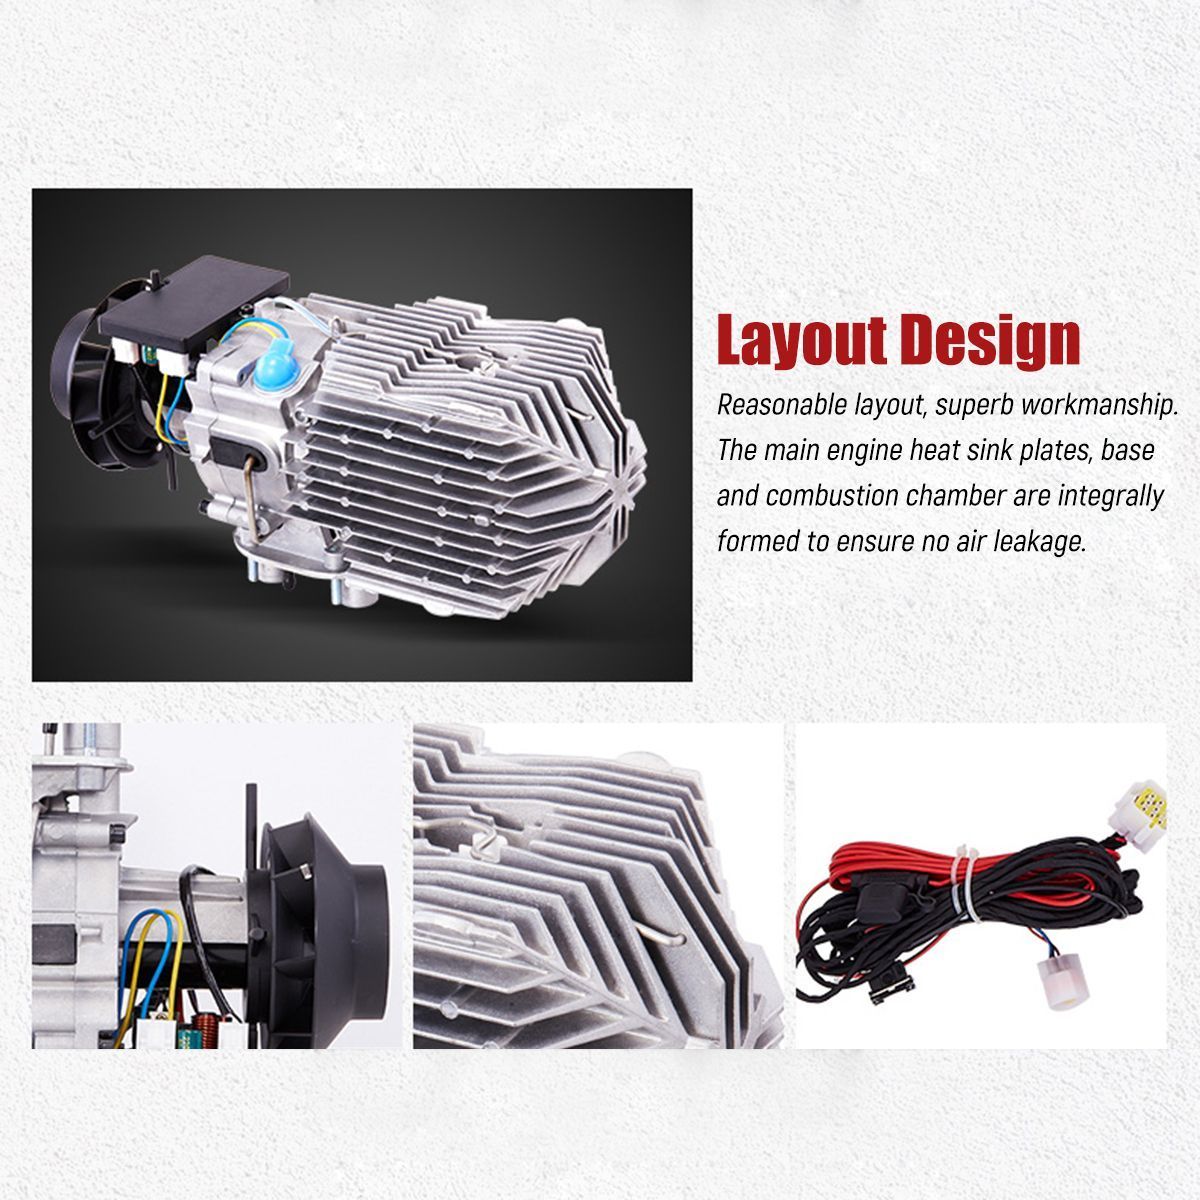 8KW-12V-Diesel-Air-Heater-Car-Heater-Parking-Heater-With-Remote-Control-LCD-Monitor-for-RV-Motorhome-1544736